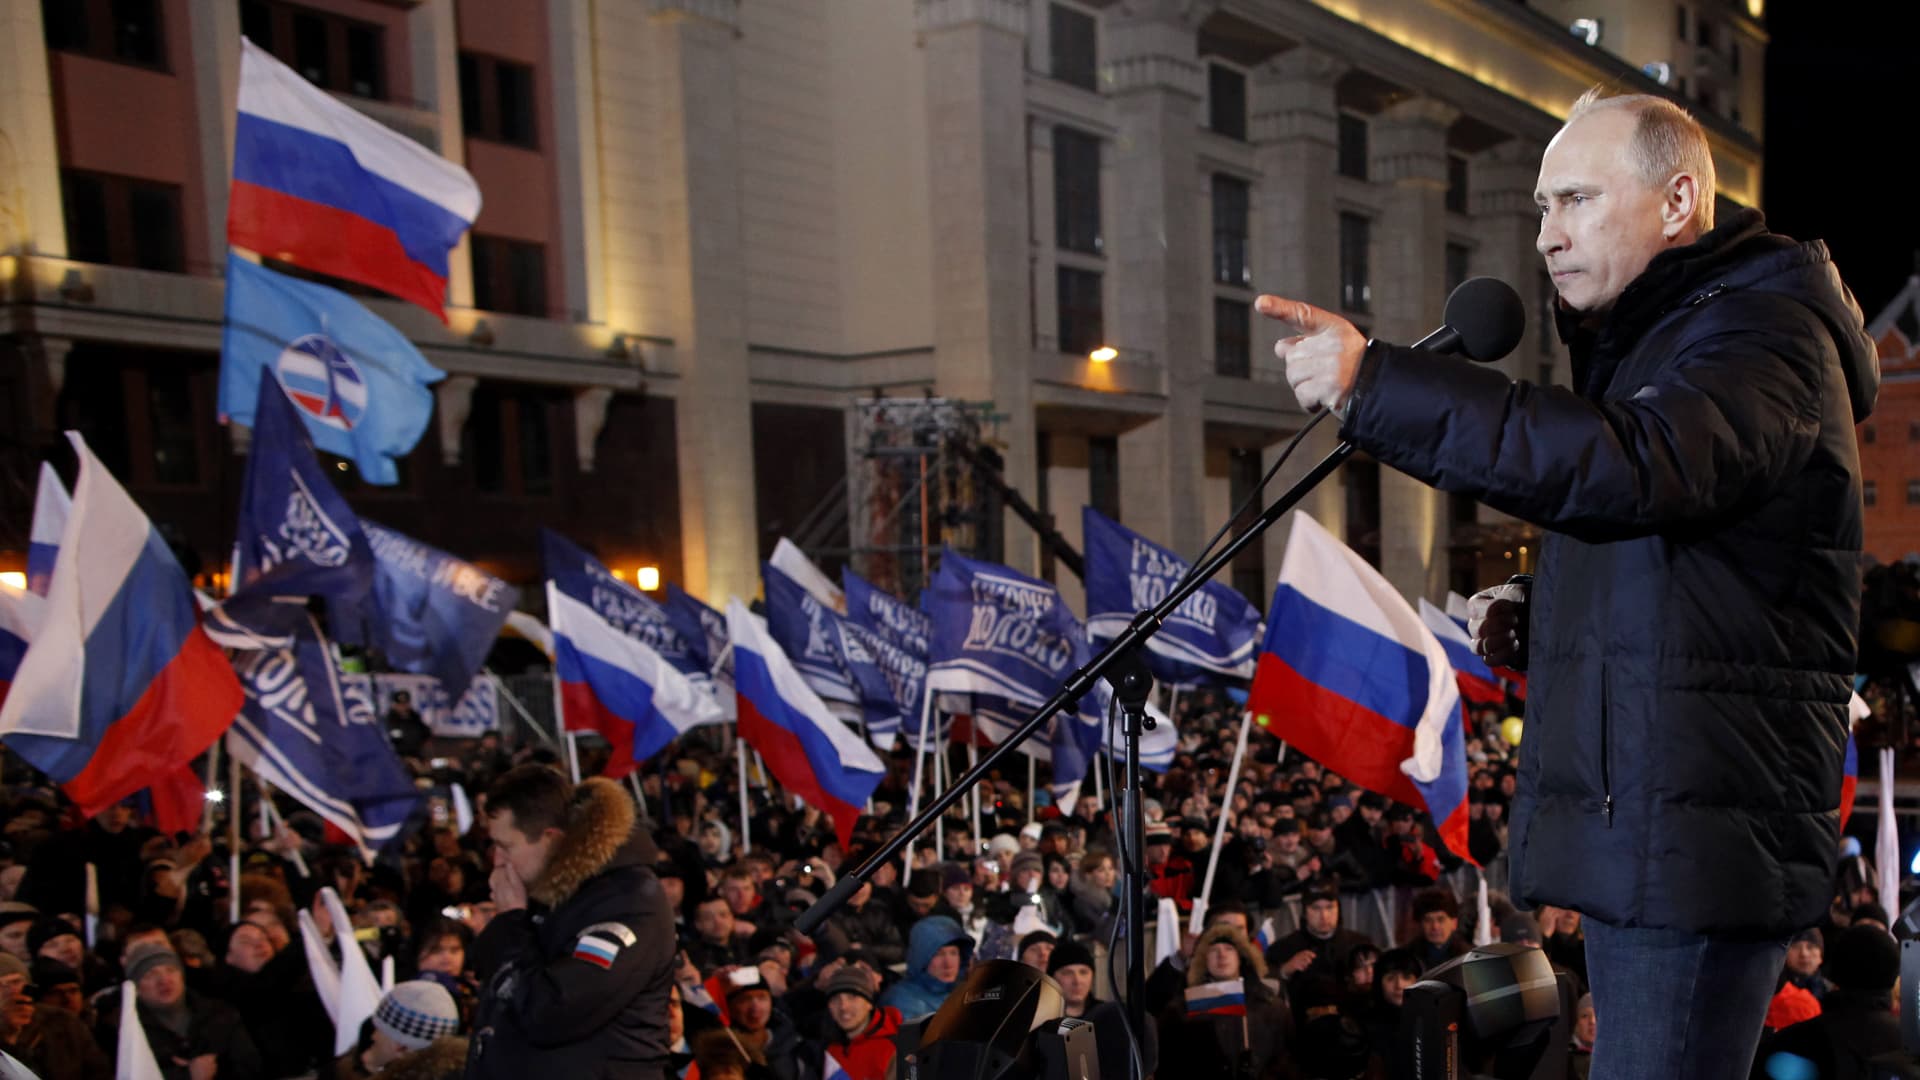 Vladimir Putin, then Russia's prime minister, addressing a rally at the Manezhnaya Square just outside the Kremlin in Moscow, on March 4, 2012.